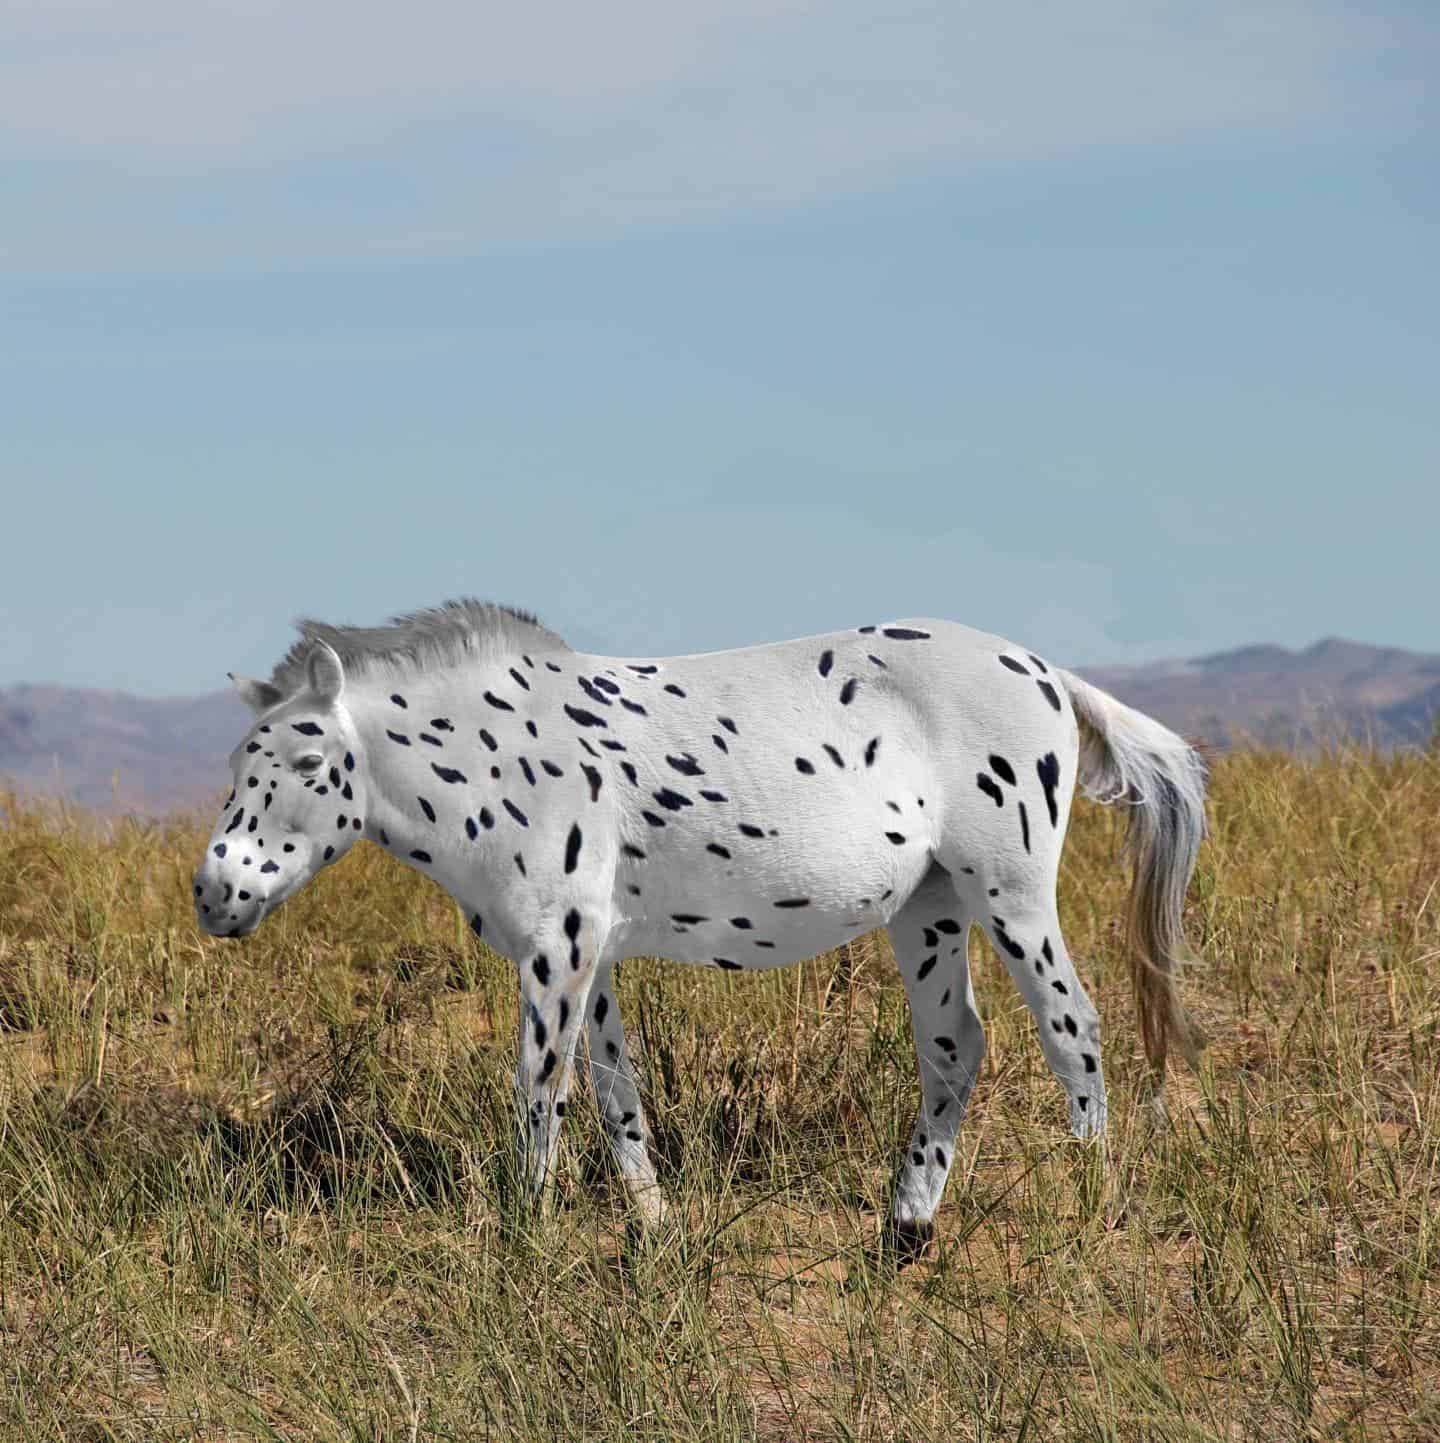 A representation of how ancient horses might have looked like (actually a recreation of a Przewalski's horse bred with leopard coloring. Image credits: Ludovic Orlando, Seas Goddard and Alan Outram.